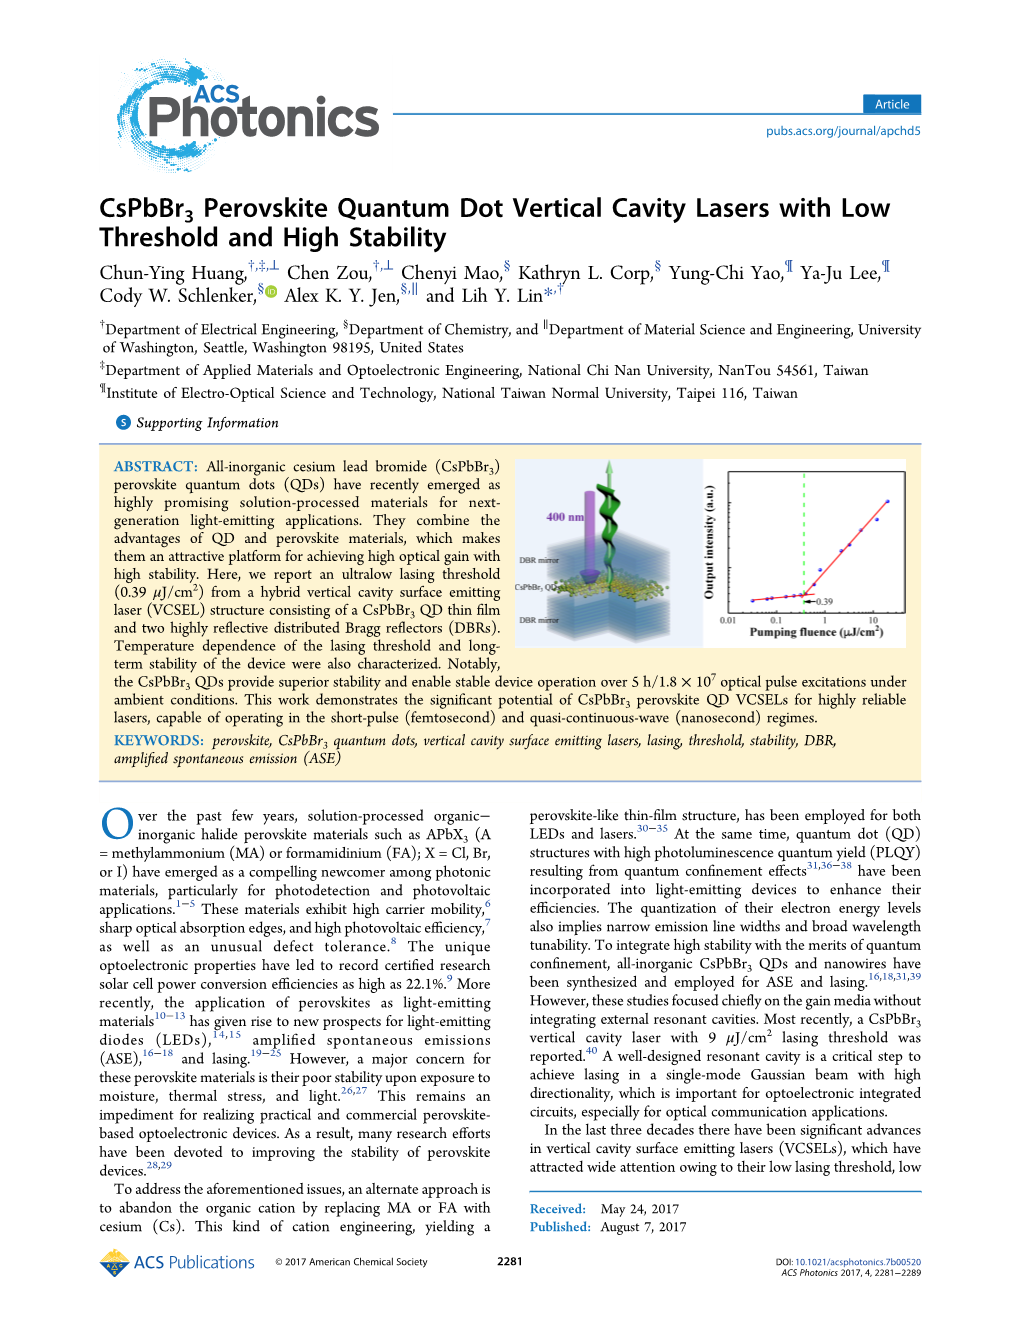 Cspbbr3 Perovskite Quantum Dot Vertical Cavity Lasers with Low Threshold and High Stability † ‡ ⊥ † ⊥ § § ¶ ¶ Chun-Ying Huang, , , Chen Zou, , Chenyi Mao, Kathryn L